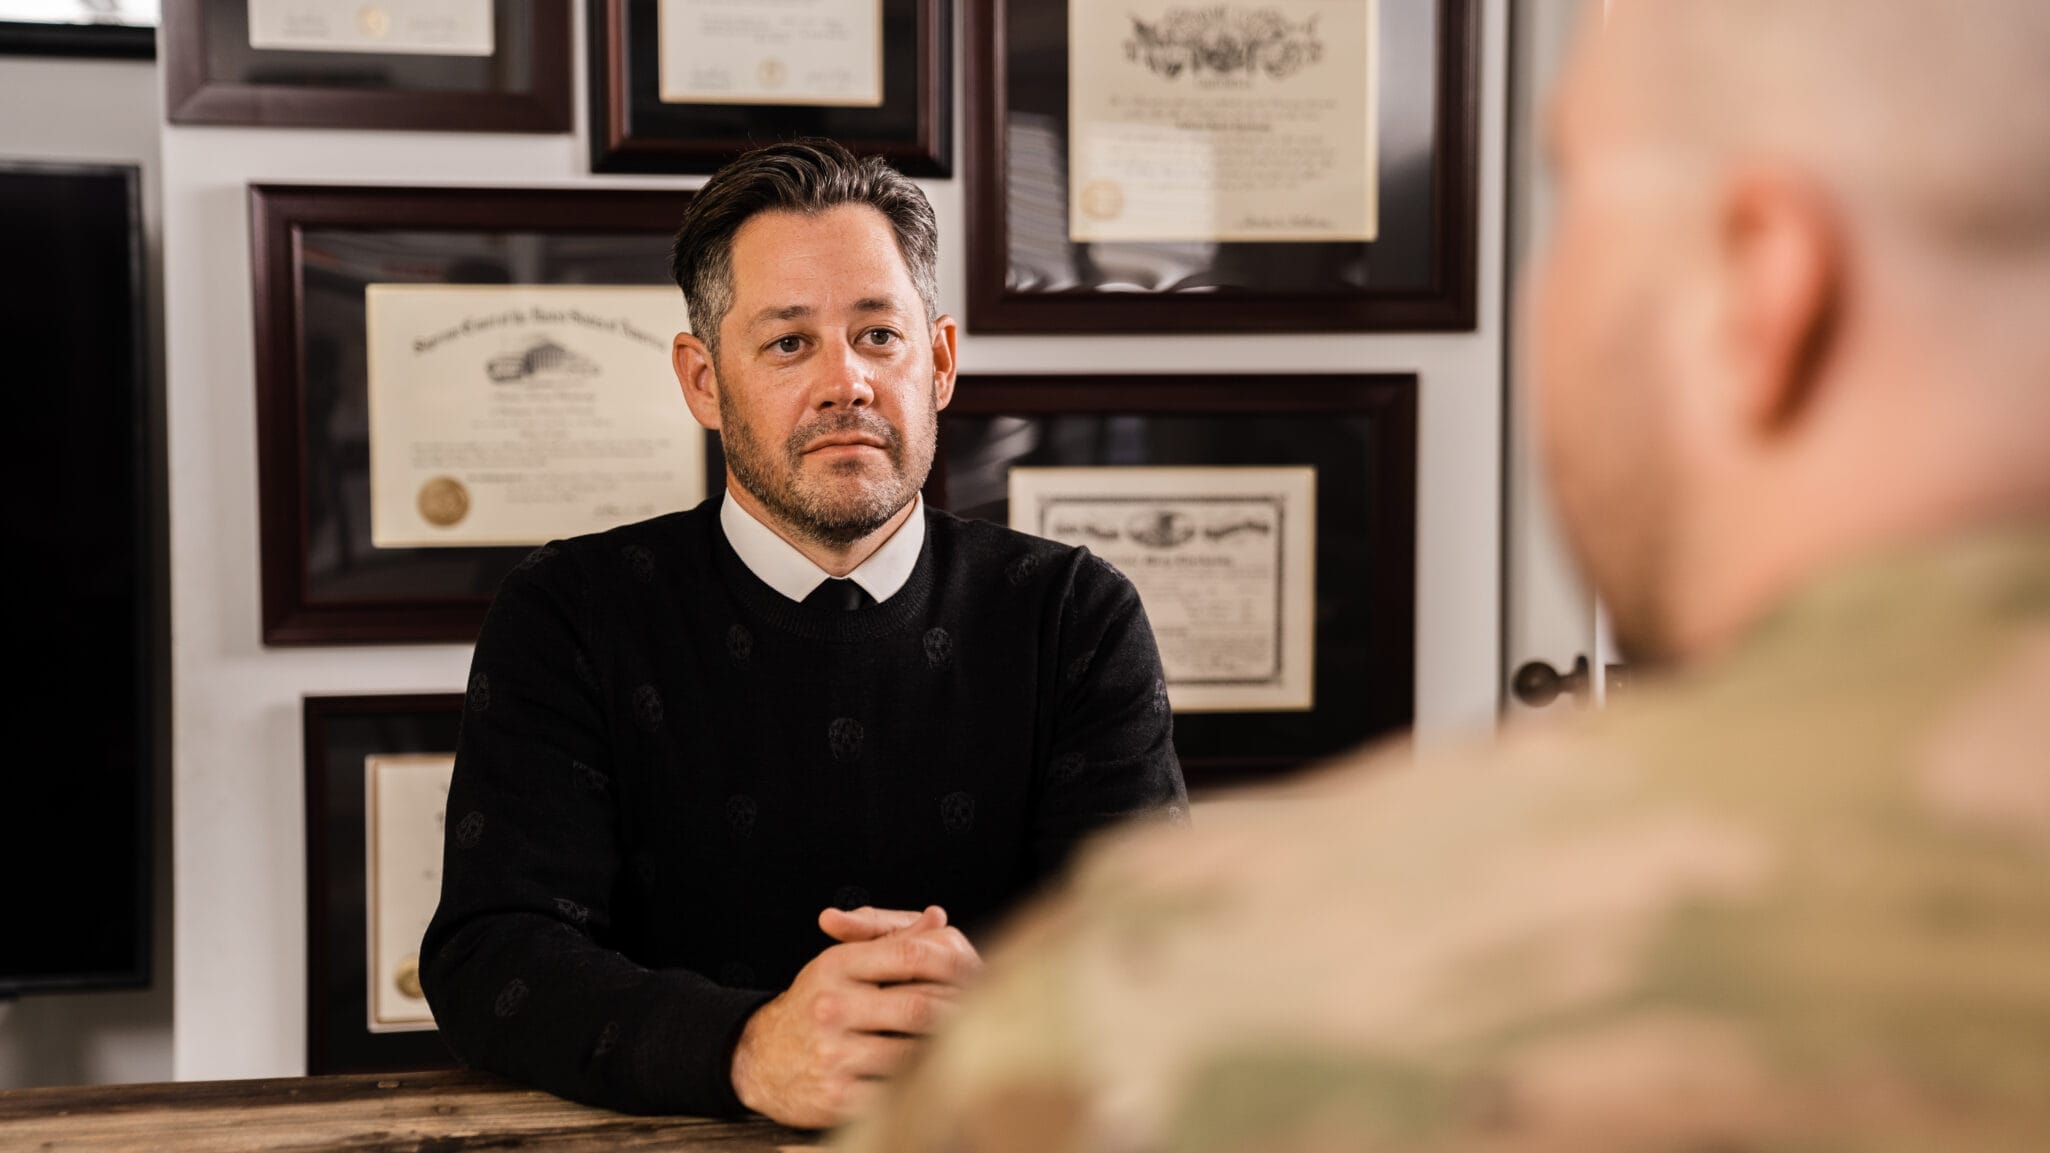 Advice When Your Son is Accused of Misconduct in the Military